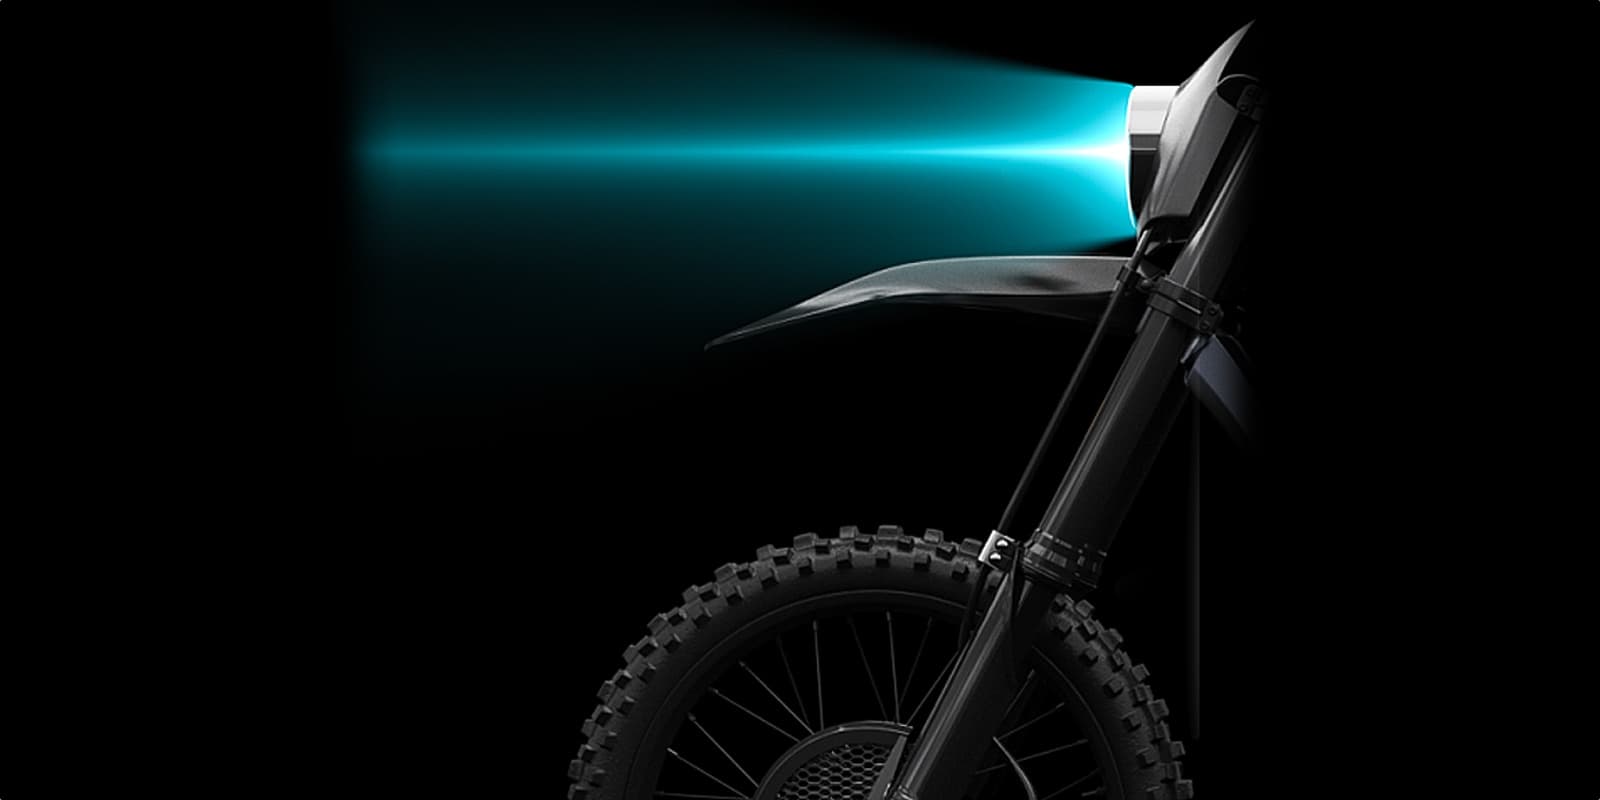 After price drop on Metacycle e-motorcycle, SONDORS teases electric dirt bike